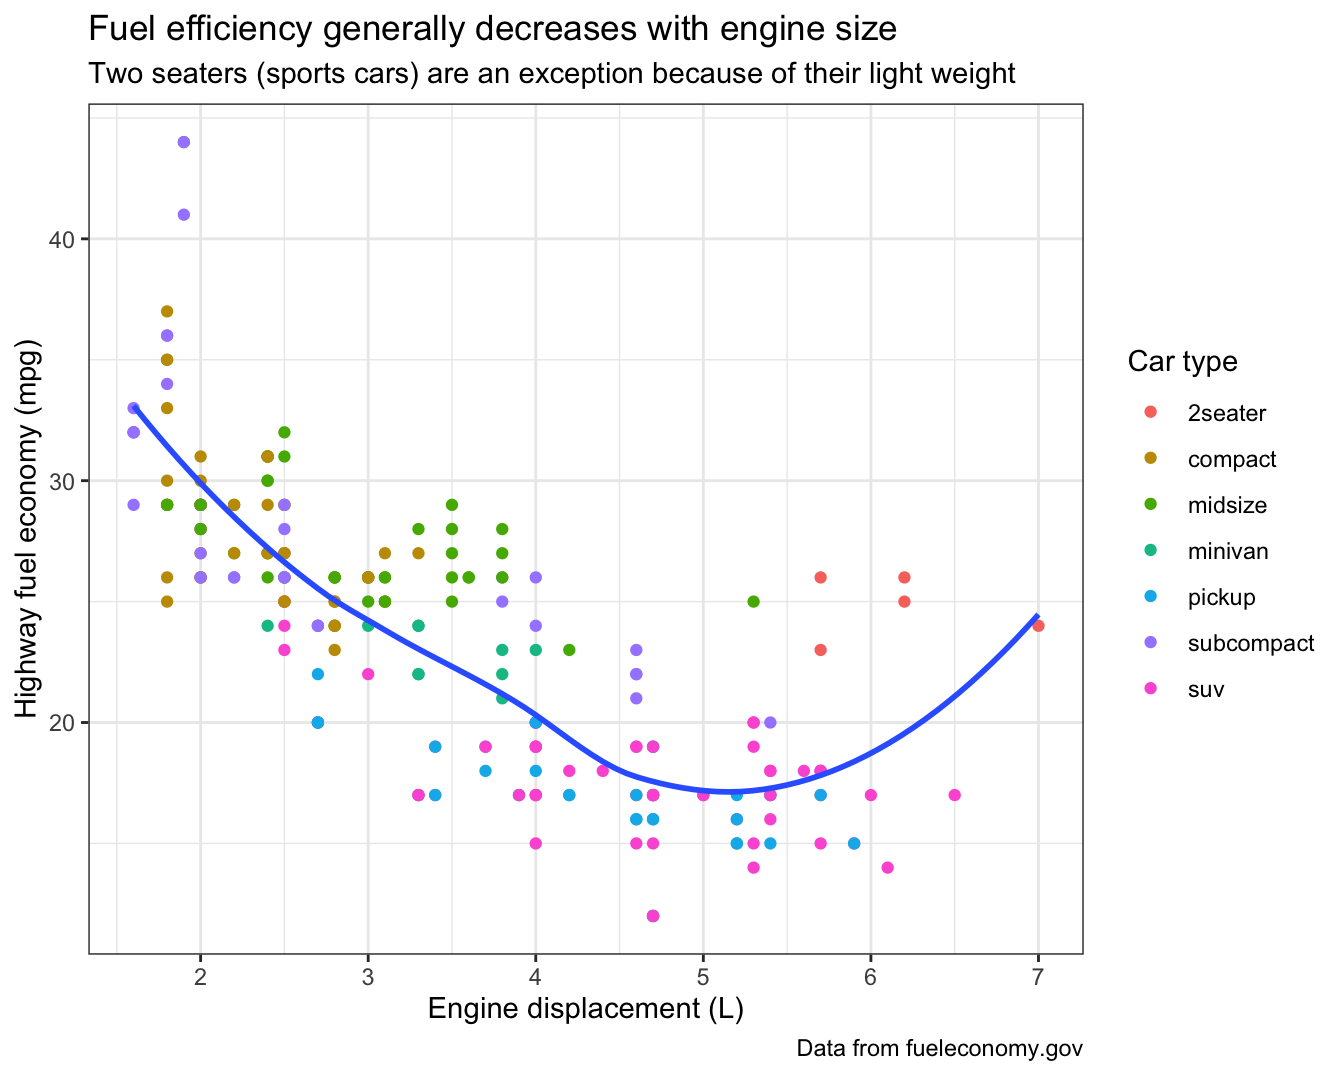 Scatterplot of highway fuel efficiency versus engine size of cars, where
points are colored according to the car class. A smooth curve following
the trajectory of the relationship between highway fuel efficiency versus
engine size of cars is overlaid. The x-axis is labelled "Engine
displacement (L)" and the y-axis is labelled "Highway fuel economy (mpg)".
The legend is labelled "Car type". The plot is titled "Fuel efficiency
generally decreases with engine size". The subtitle is "Two seaters
(sports cars) are an exception because of their light weight" and the
caption is "Data from fueleconomy.gov".